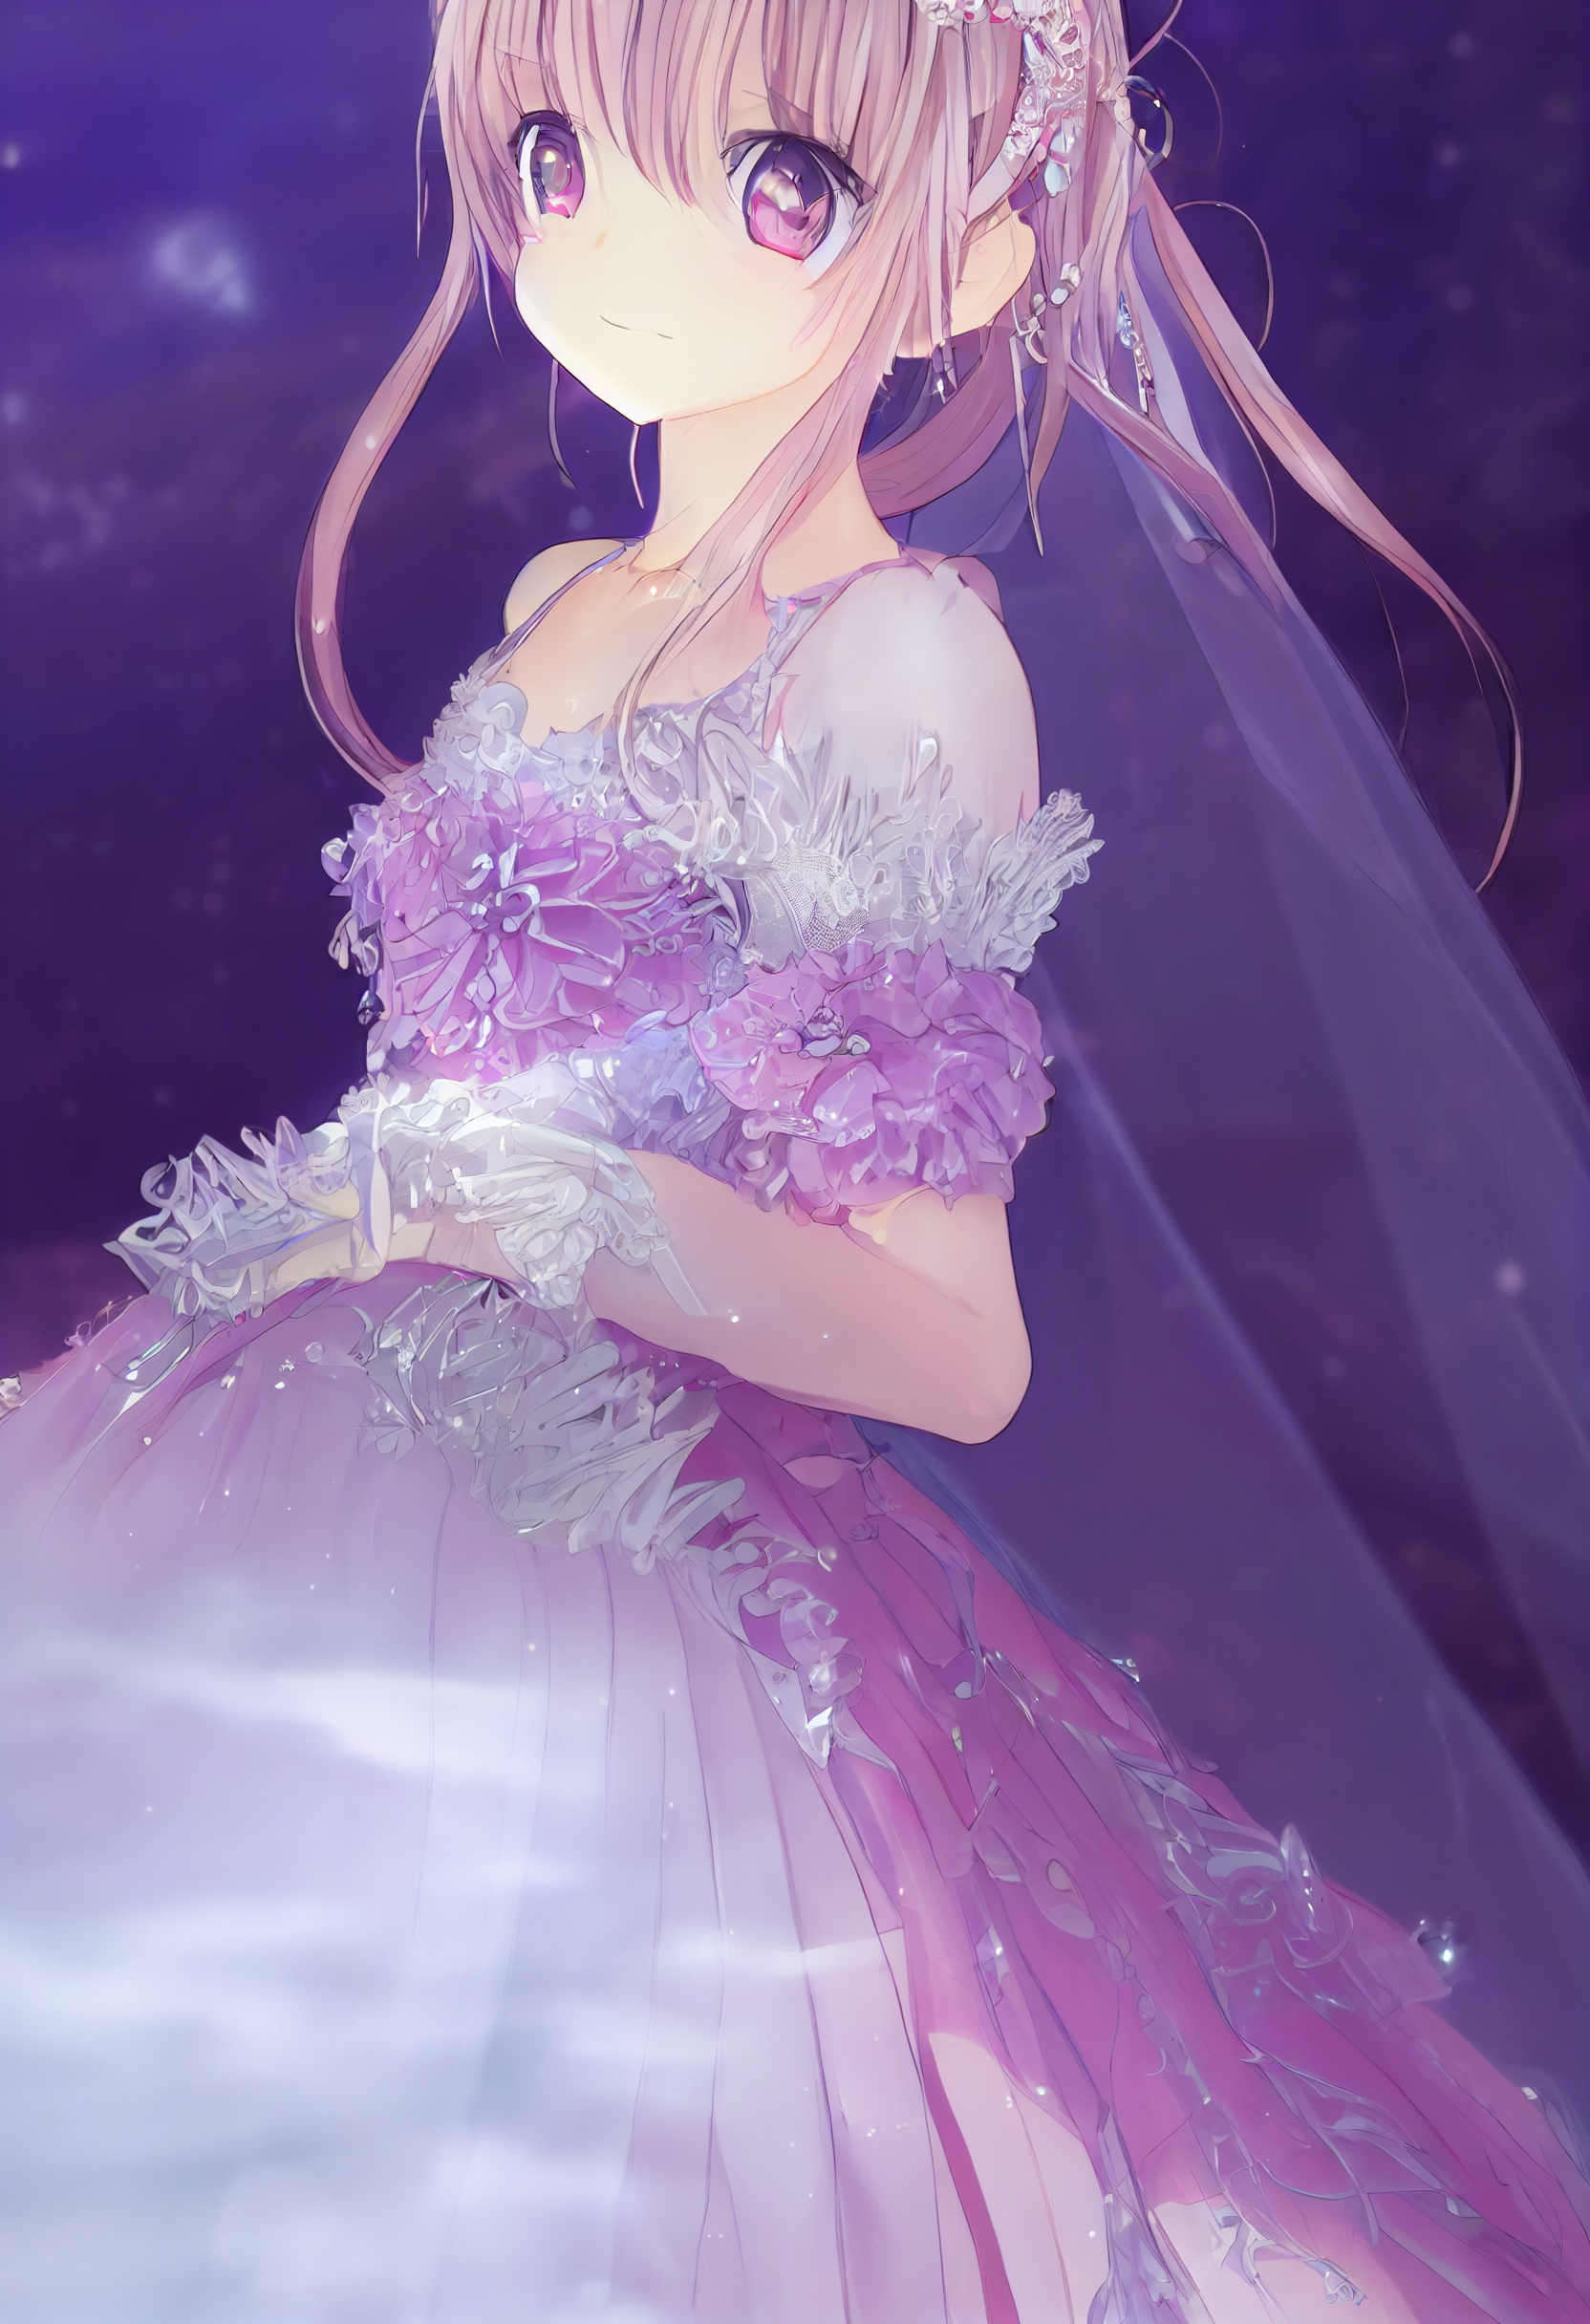 AI Image Generator: A beautiful amazing anime art of busy anime princess  wearing a exquisite dress with a low neckline, a short skirt, and white  lace trim, wearing a gold tiara, wearing